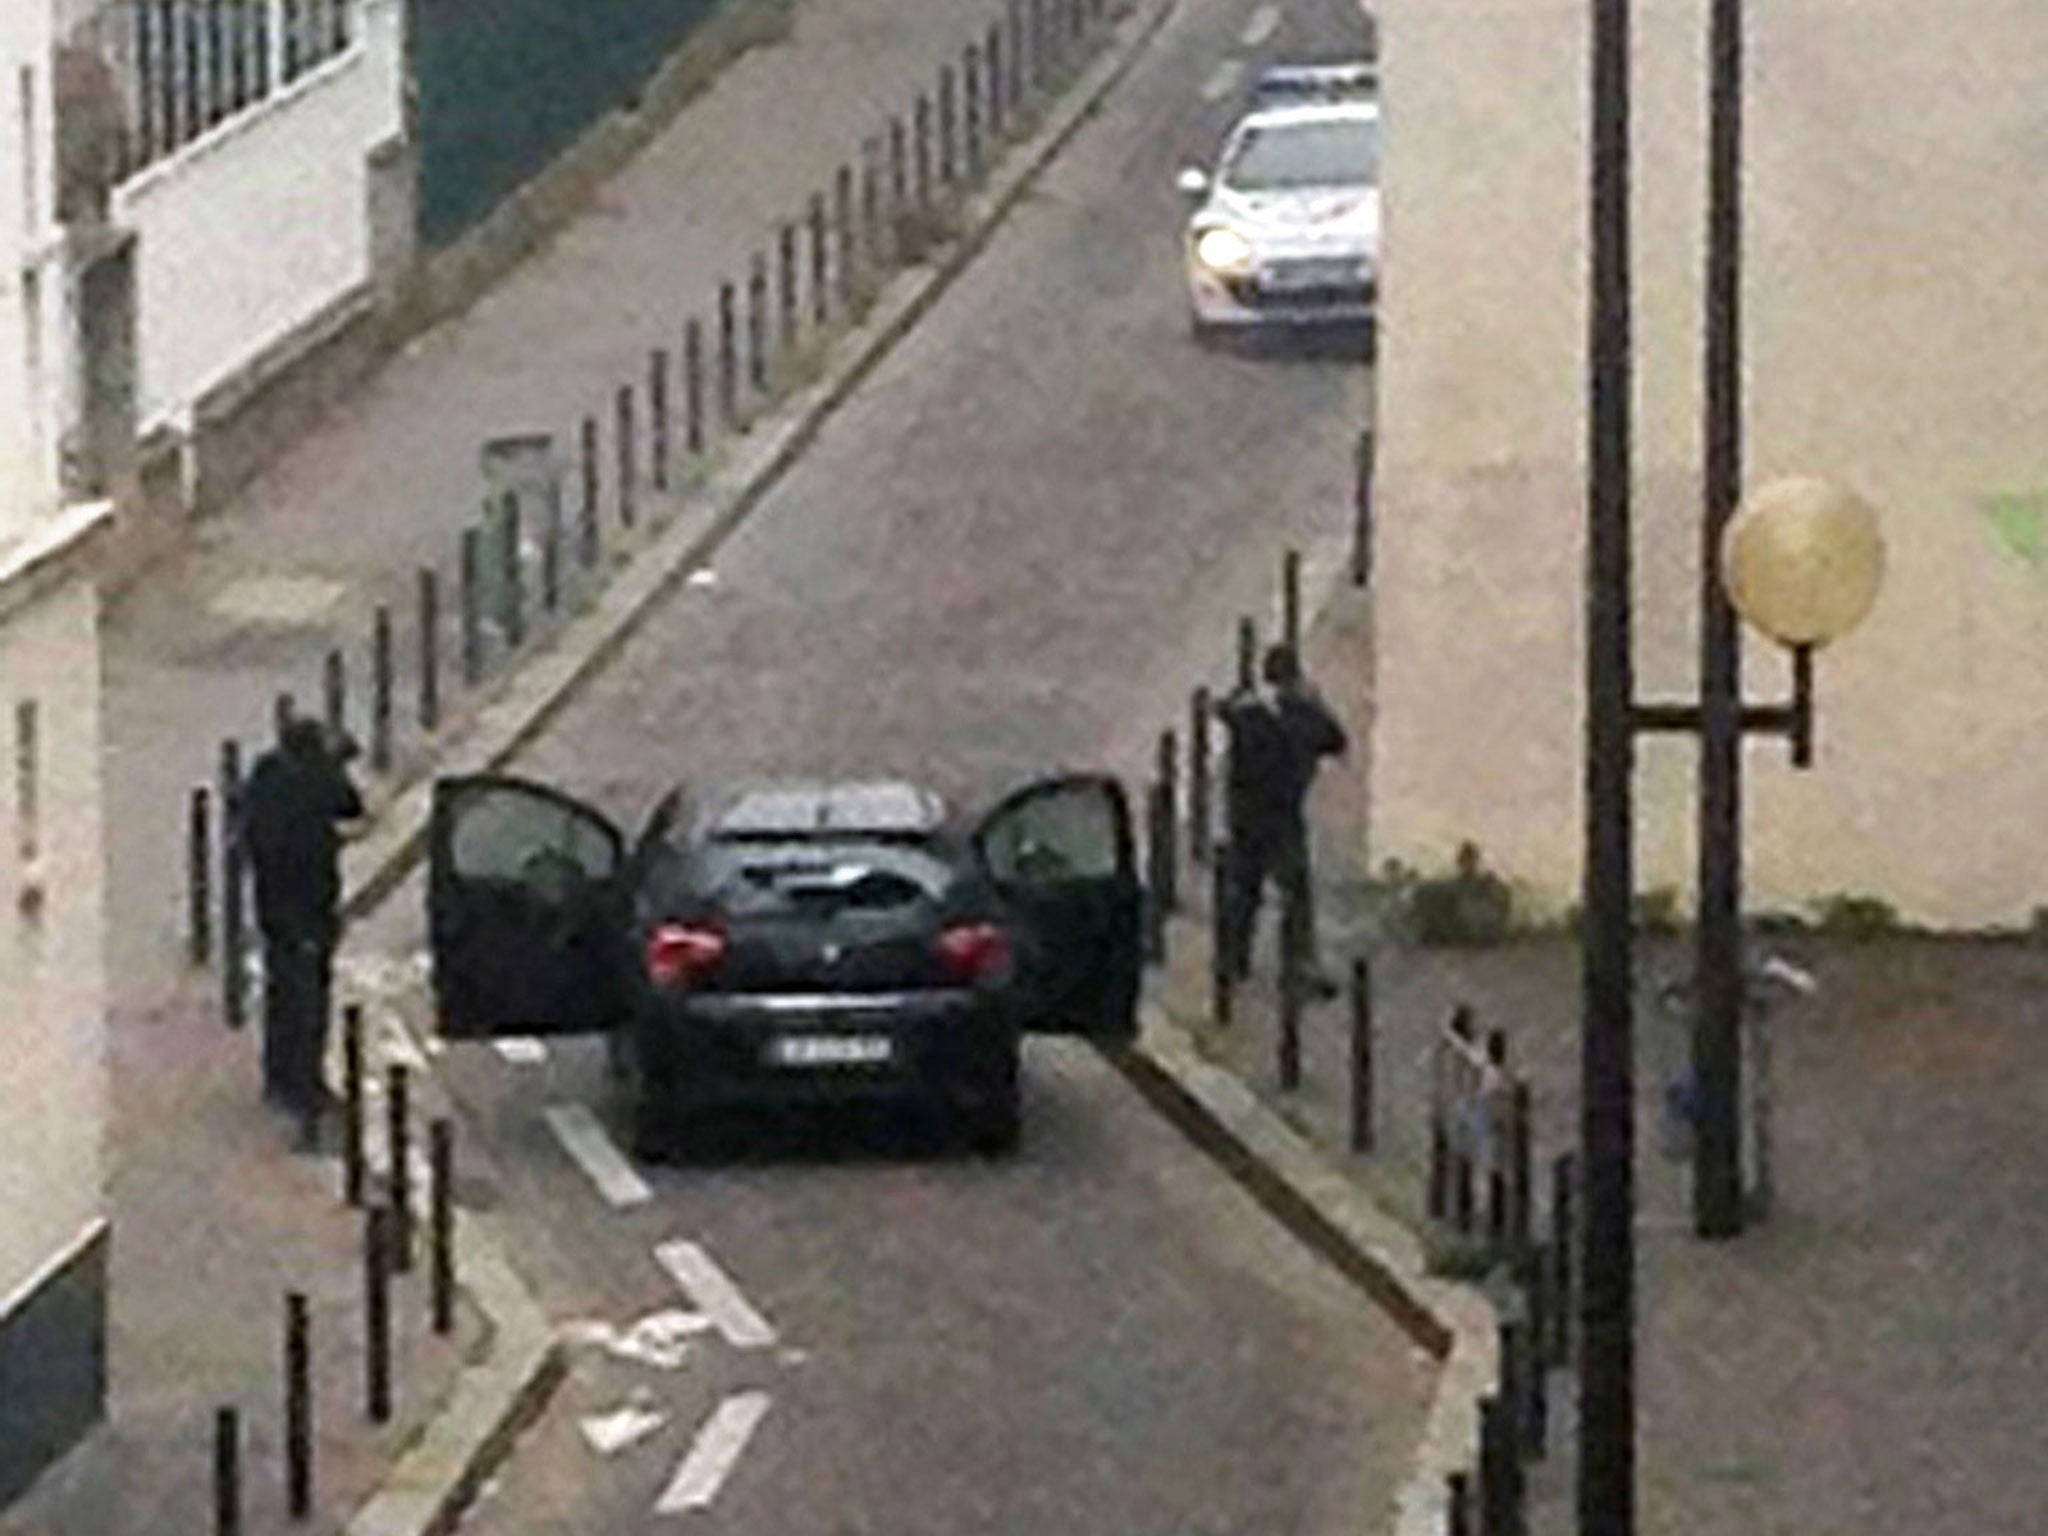 Armed gunmen face police officers near the offices of the French satirical newspaper Charlie Hebdo in Paris 